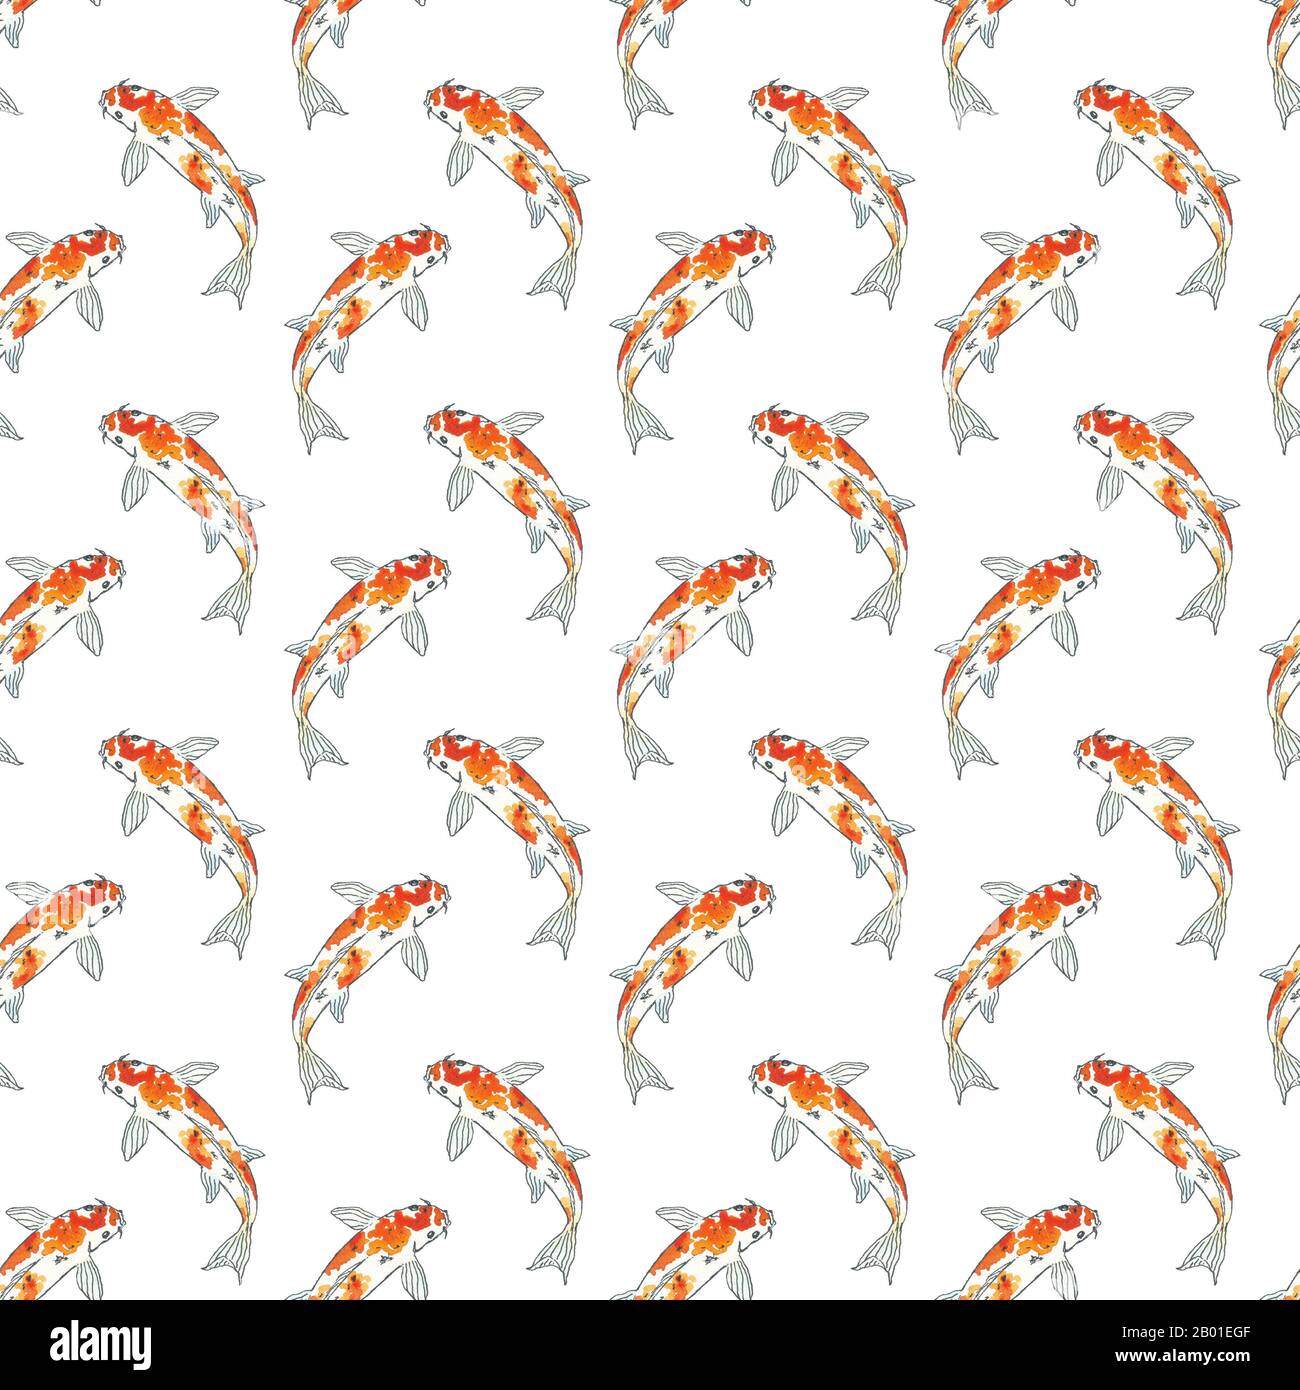 Seamless pattern of koi fish. Hand drawing sketch on white background. Watercolor illustration can be used in greeting cards, posters, flyers, banners, logo, further design etc. Stock Photo